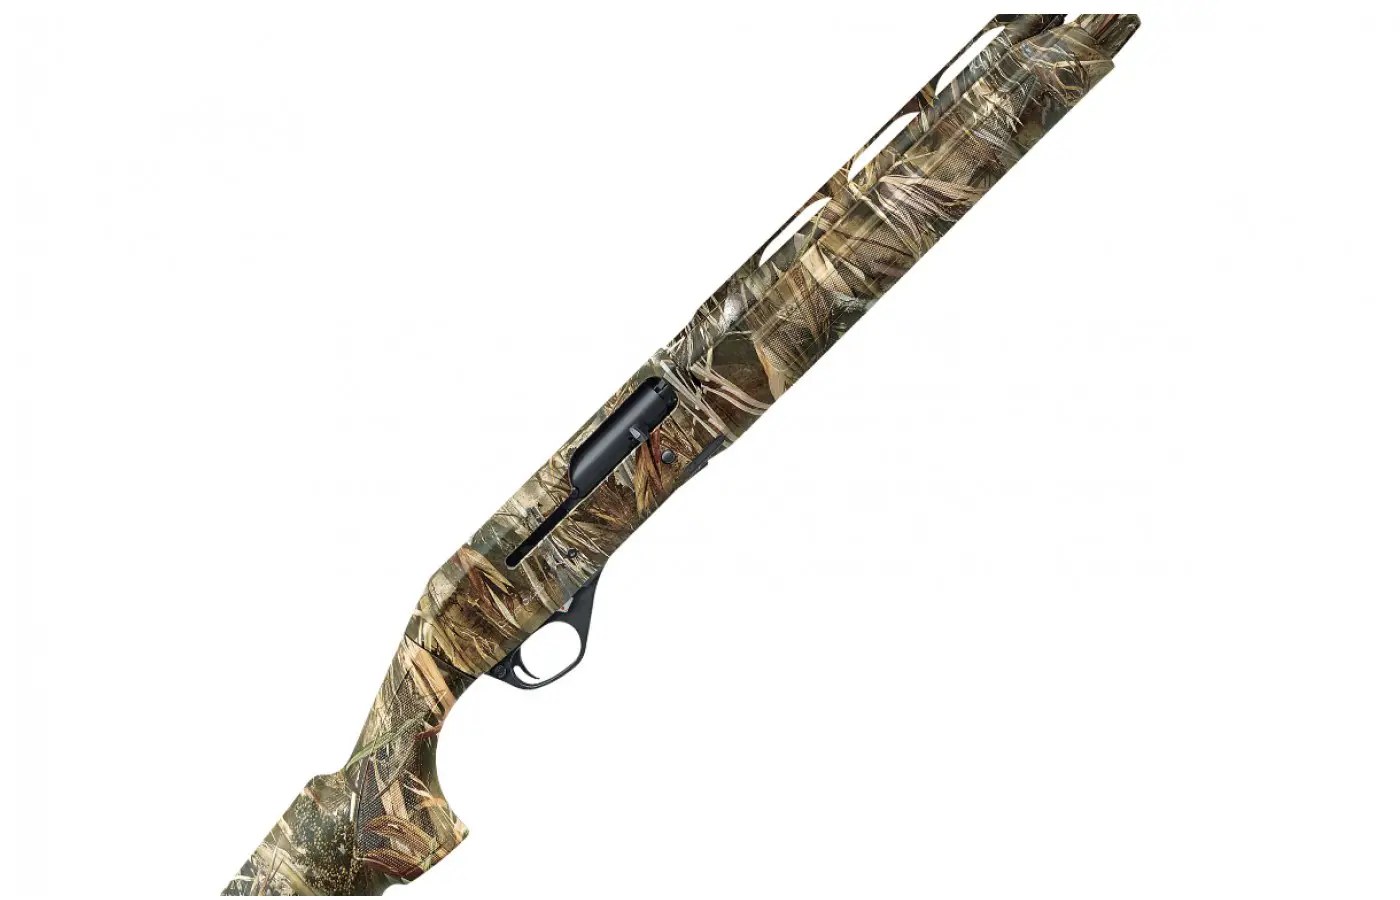 whether you happen to rely on camouflage when hunting to have your gun blend into the environment, or contrarily if you need a black coloration in order to find your gun instead of having it blend into the environment 